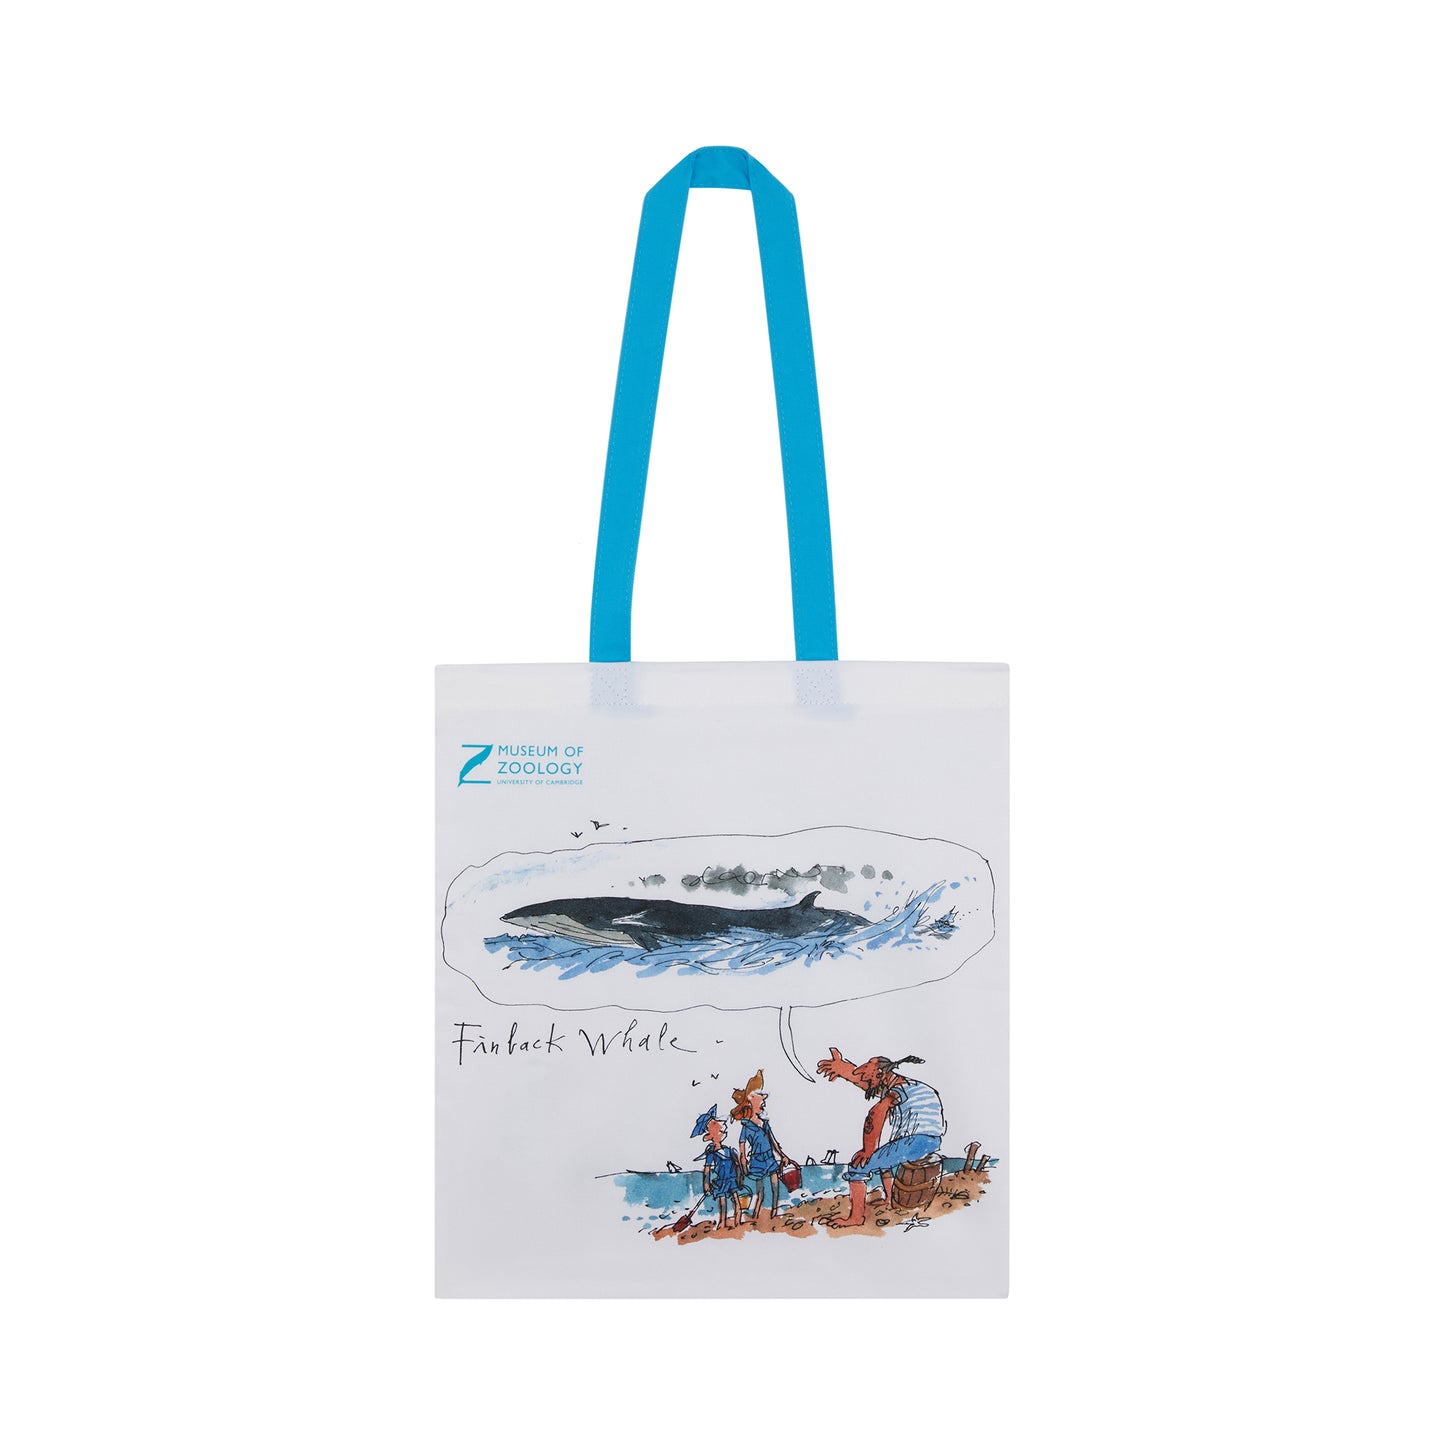 Tote bag featuring Blue Whale illustration by Quentin Blake